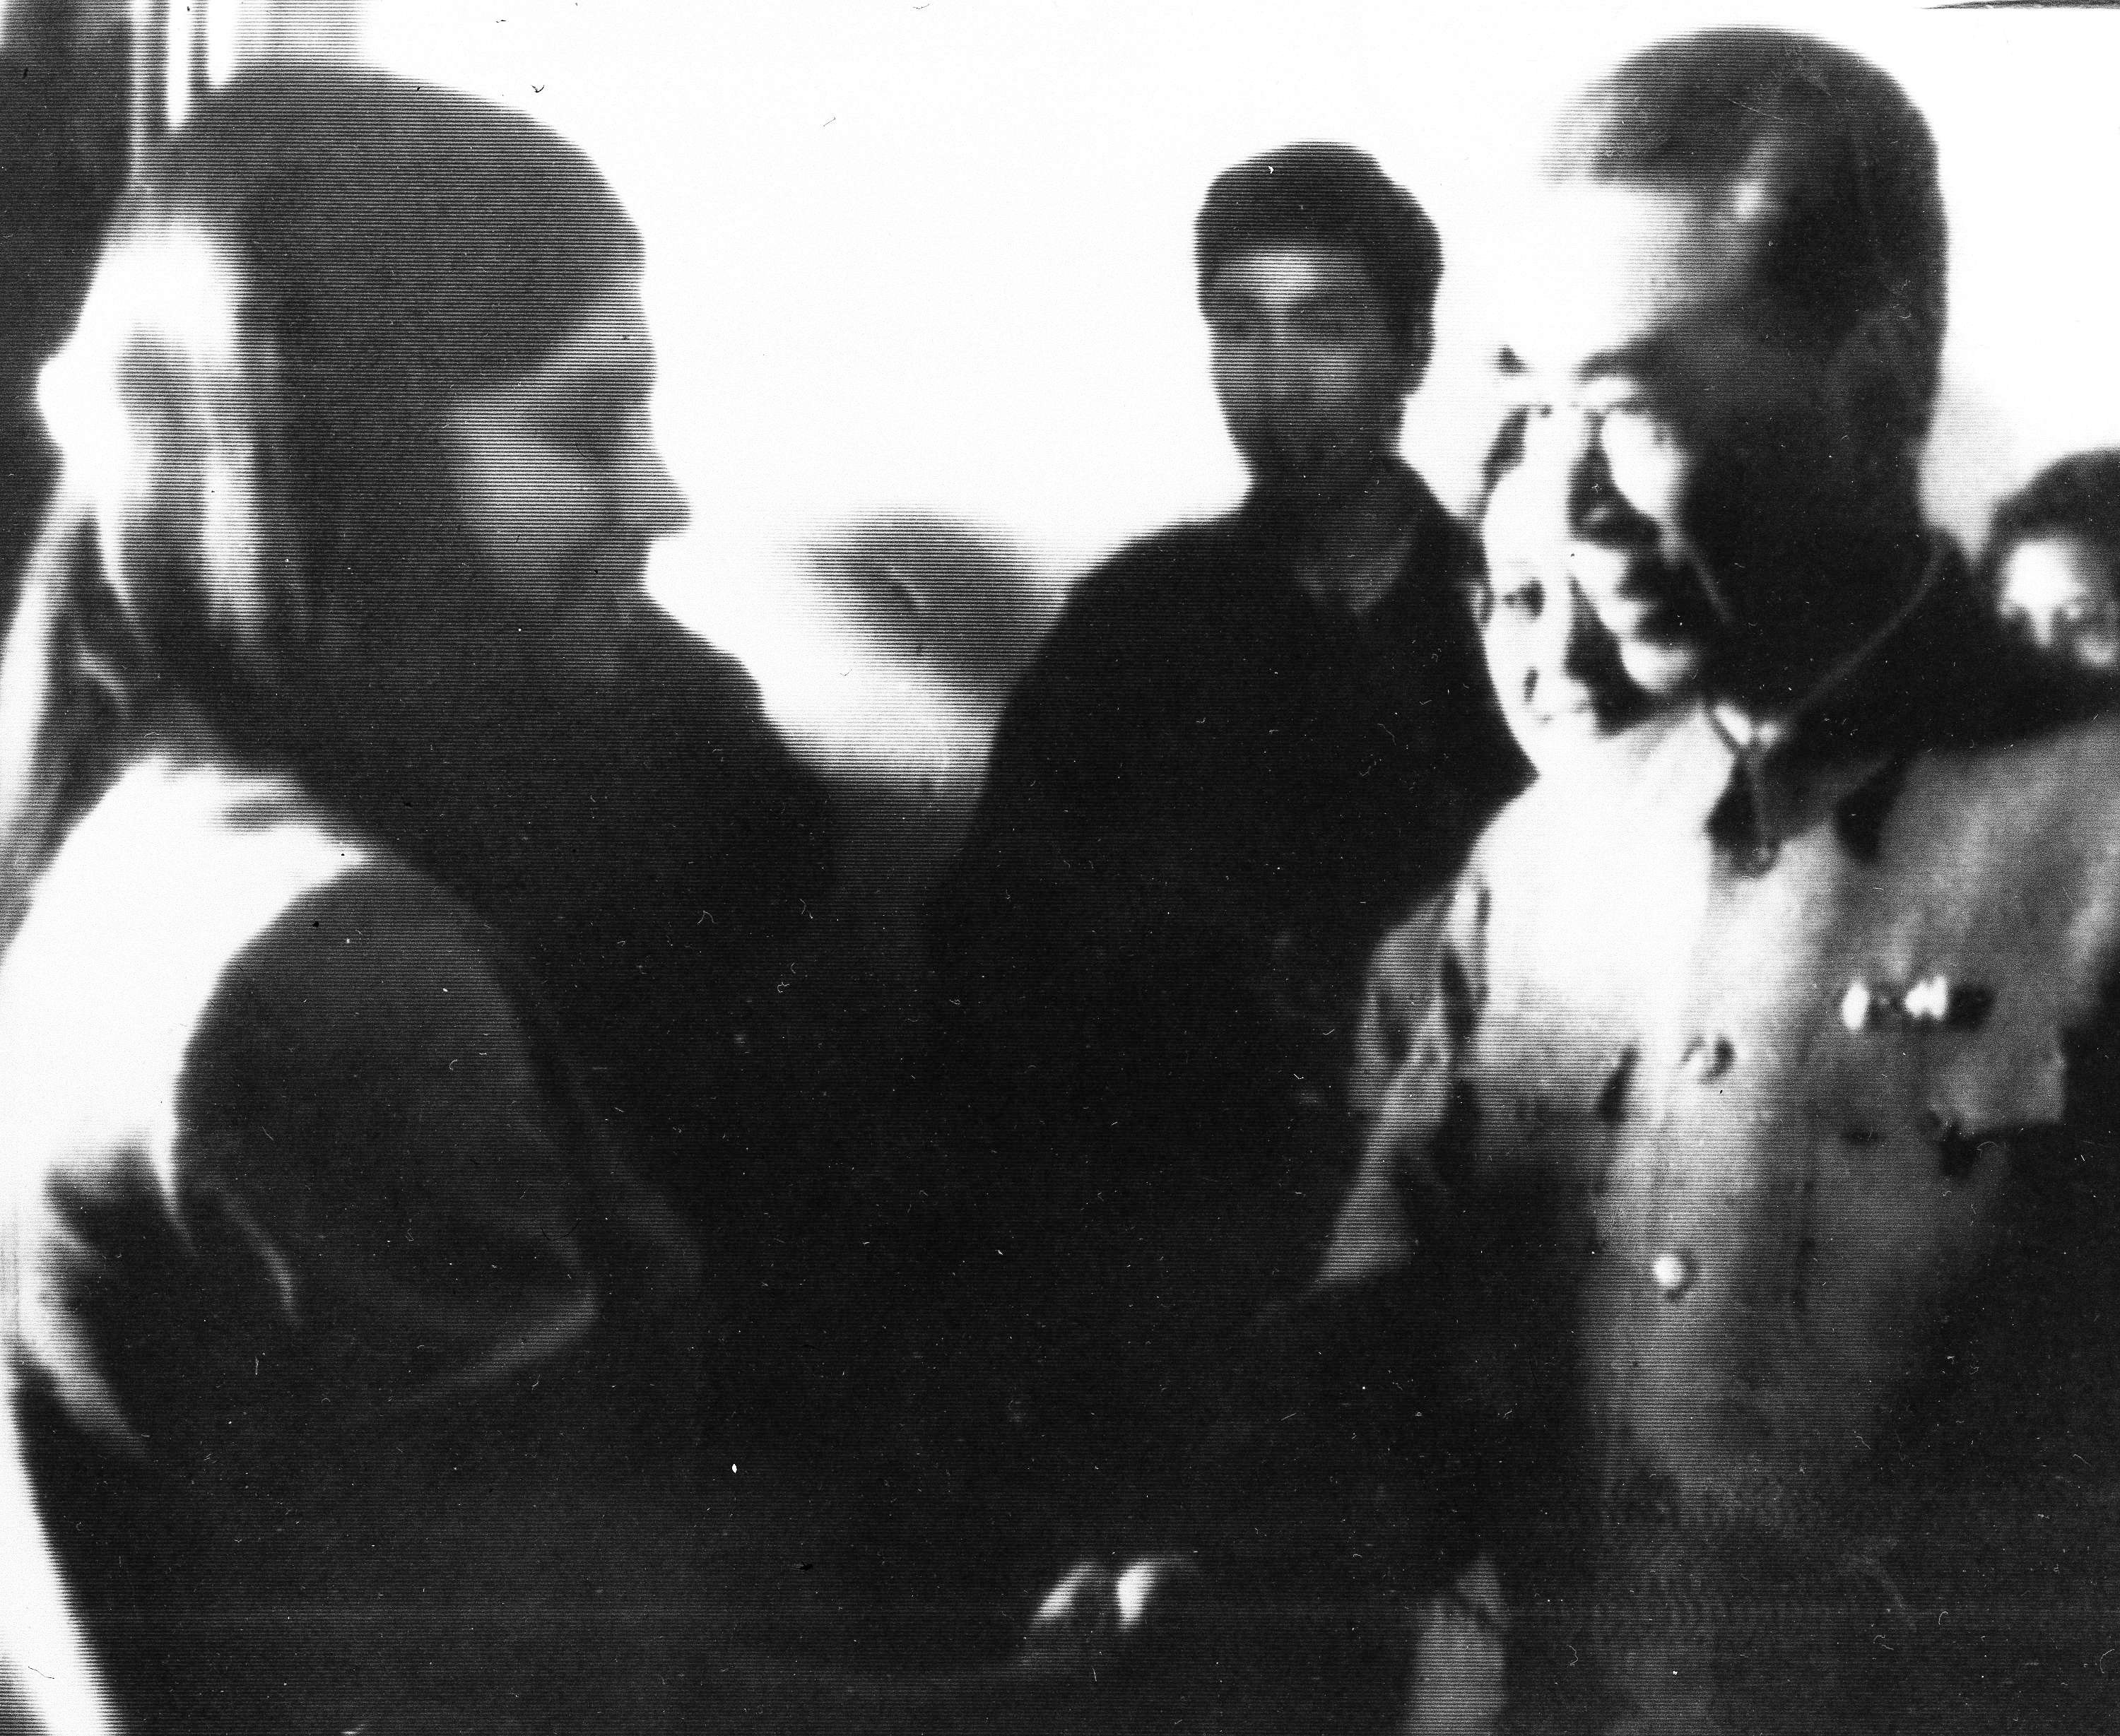 U.S. table tennis team member Judy Bochenski, 15, (L) then-known as Judy Hoarfrost, shakes hands with former China Premier Chow En-Lai in Peking, Communist China, April 14, 1971. (AP Photo)